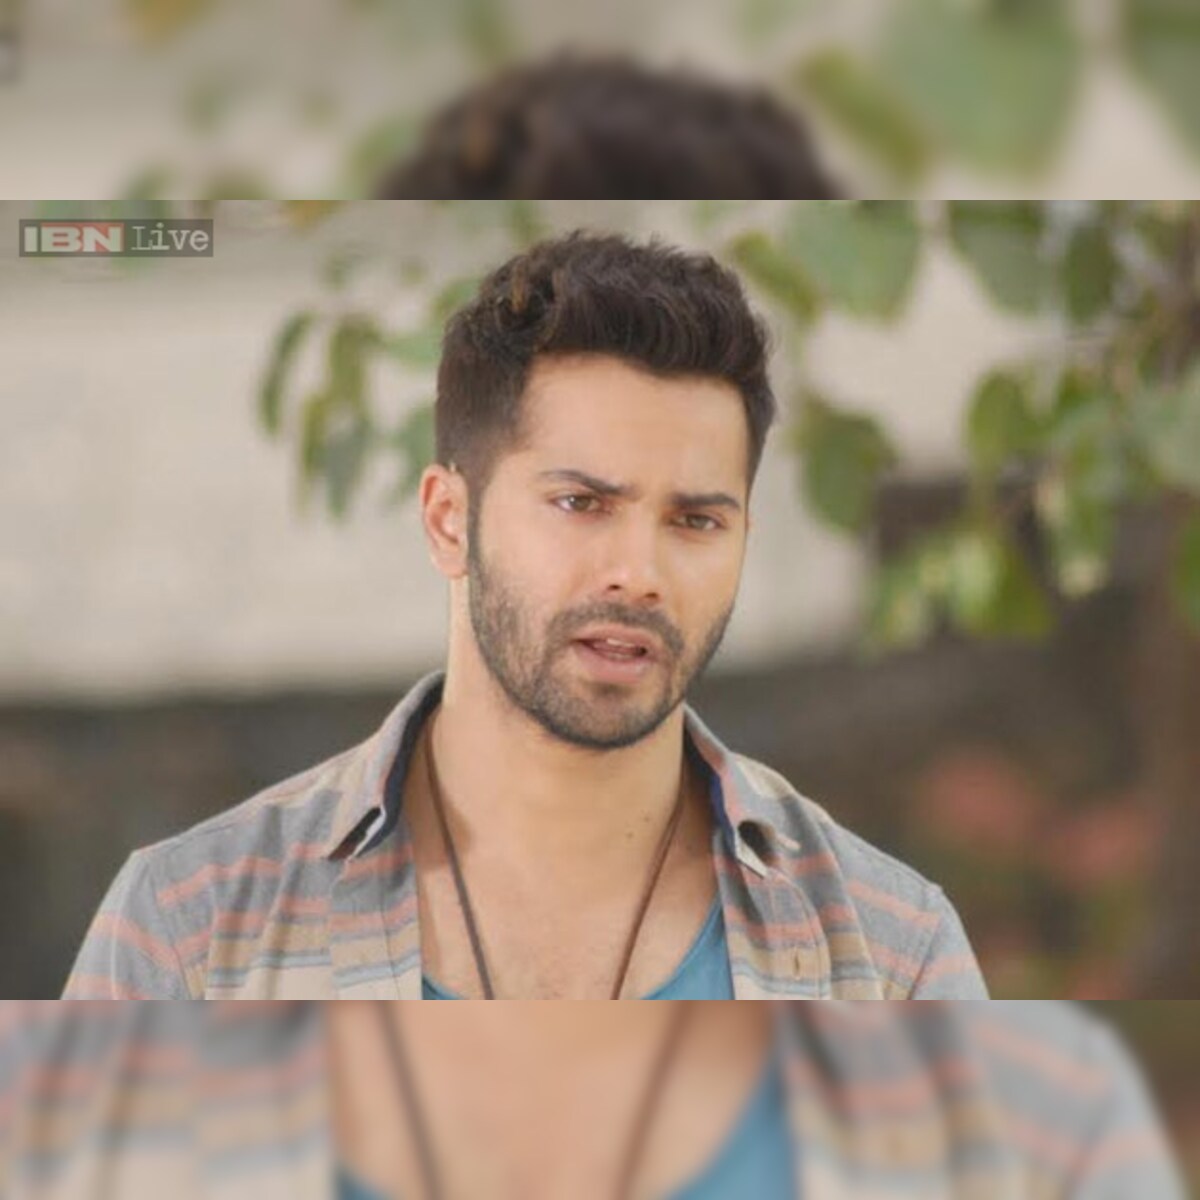 Badlapur' actor Varun Dhawan says he misses his old life and the privacy he  enjoyed